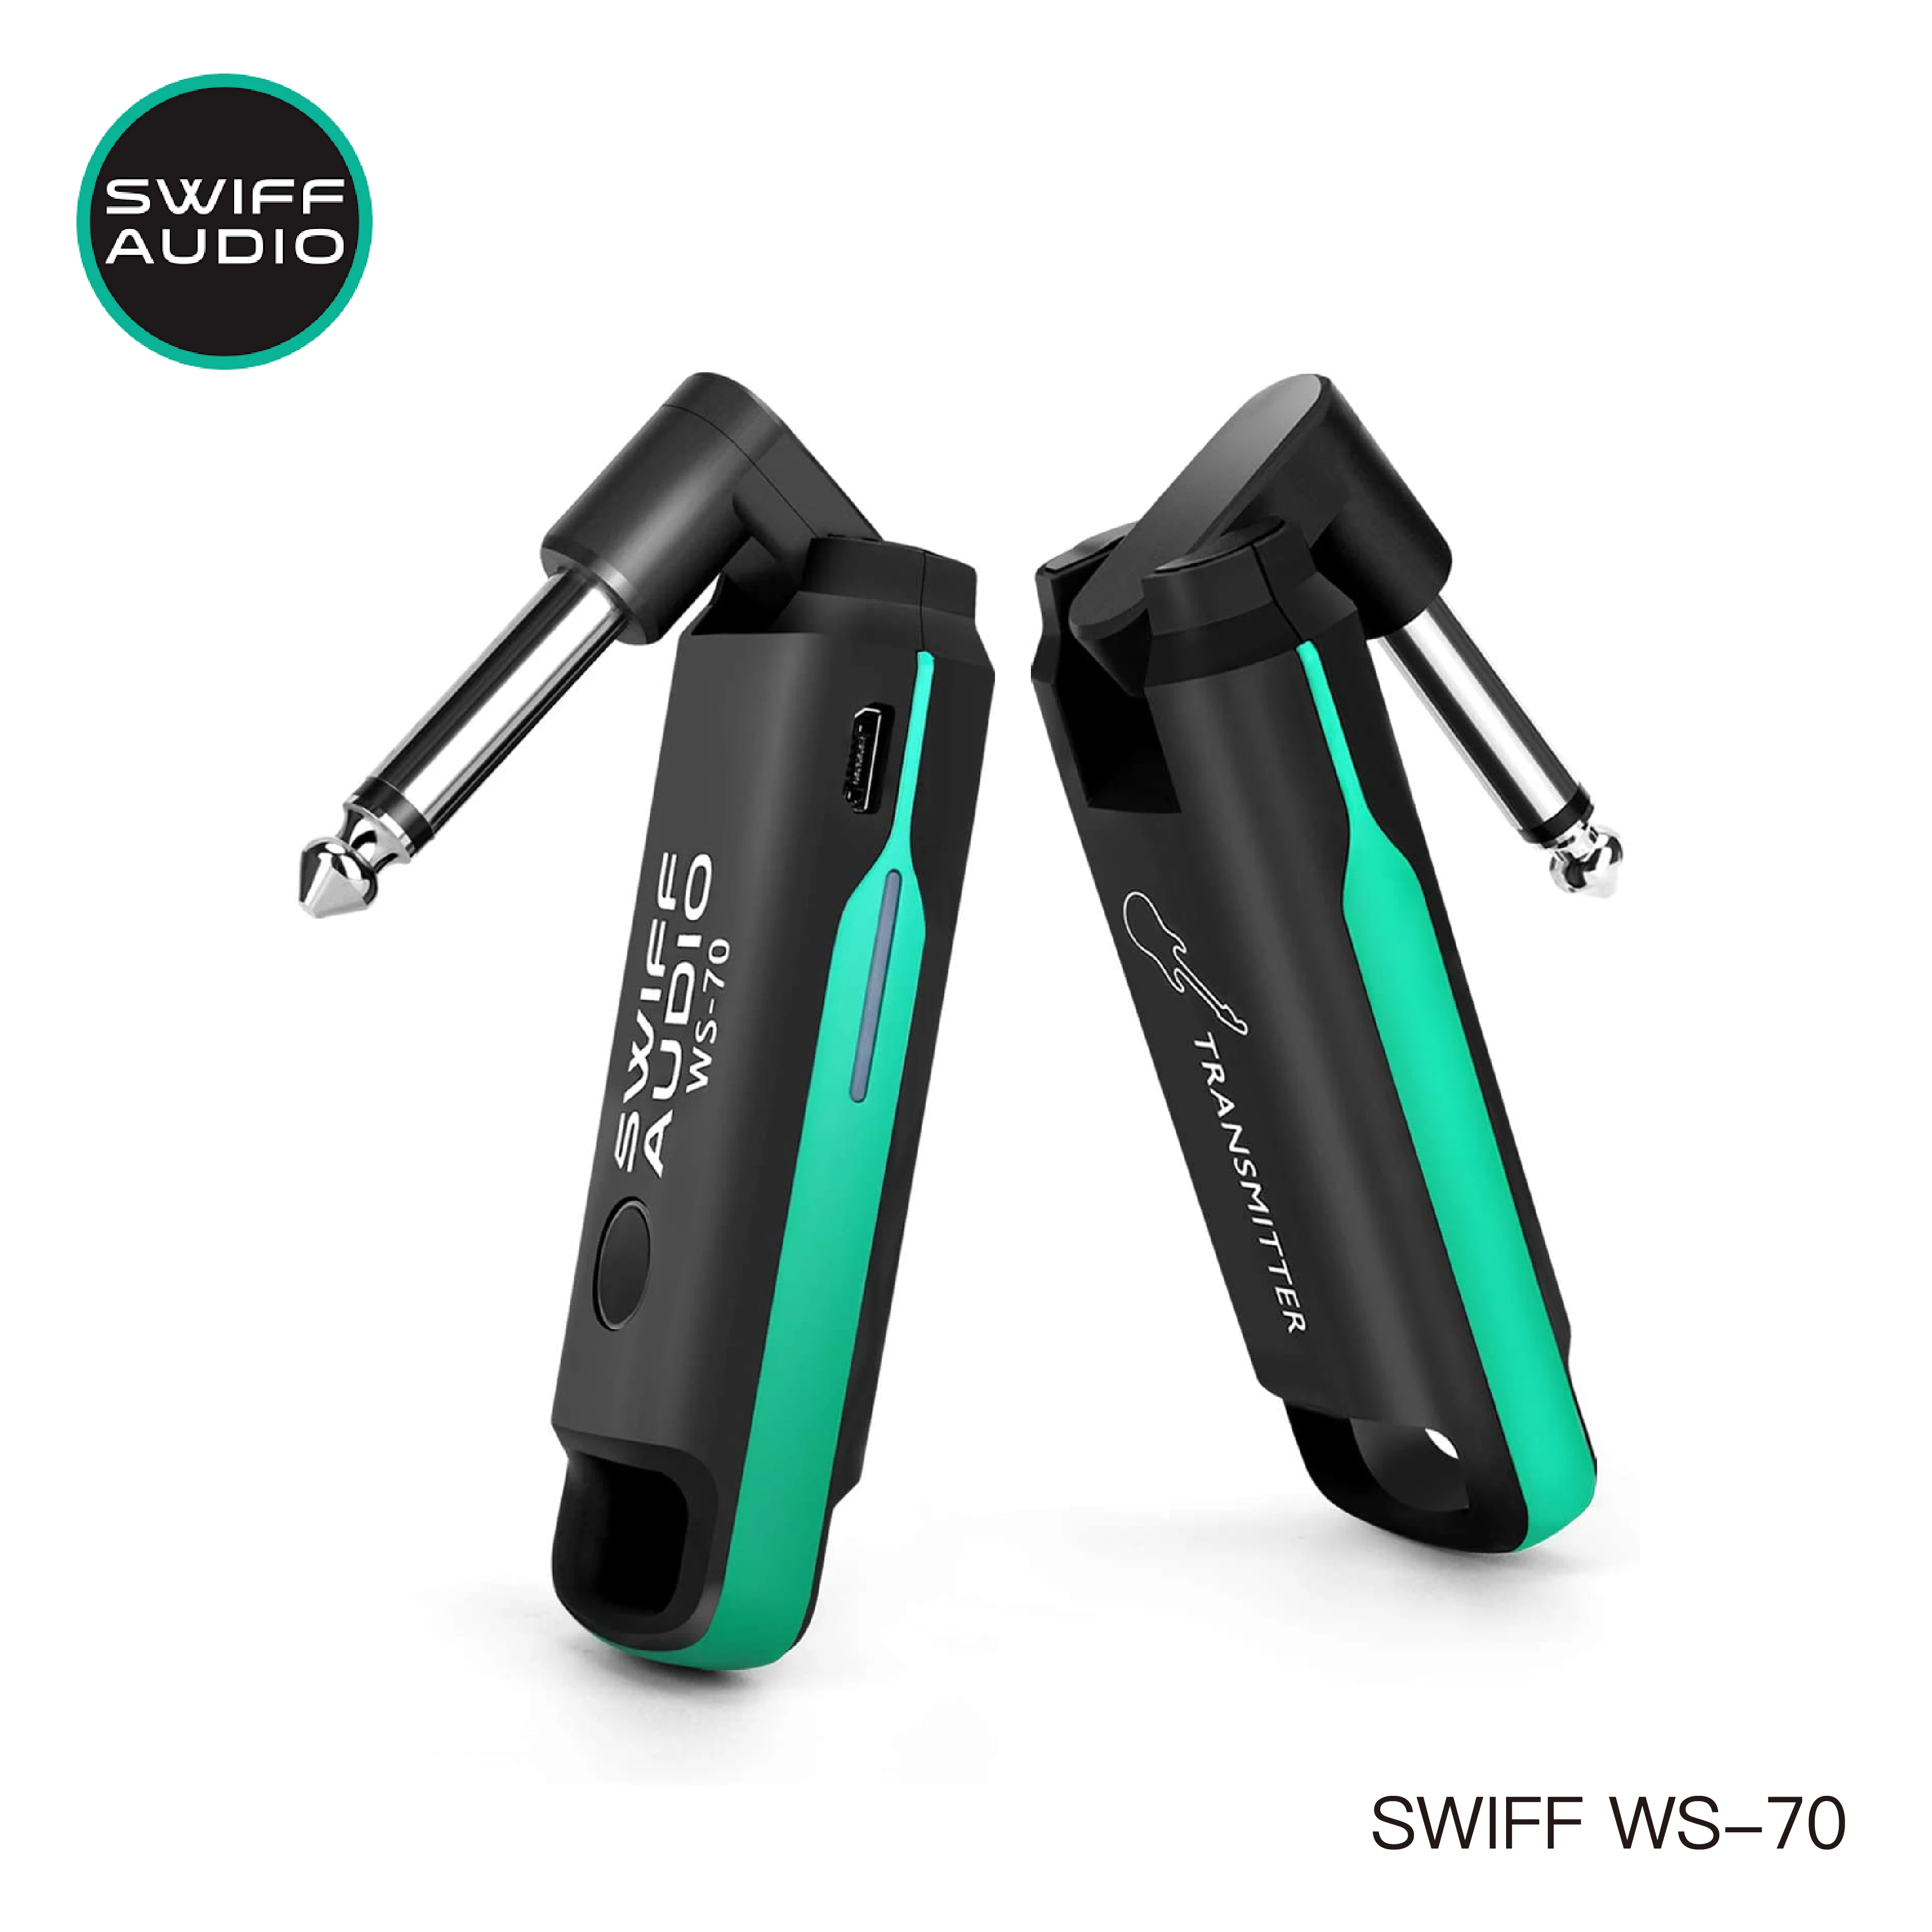 SWIFF WS-70 JEWireless System Transmetteur pour tingLow-Latence et High Audio Reproduction JEAccessrespiration WS 70